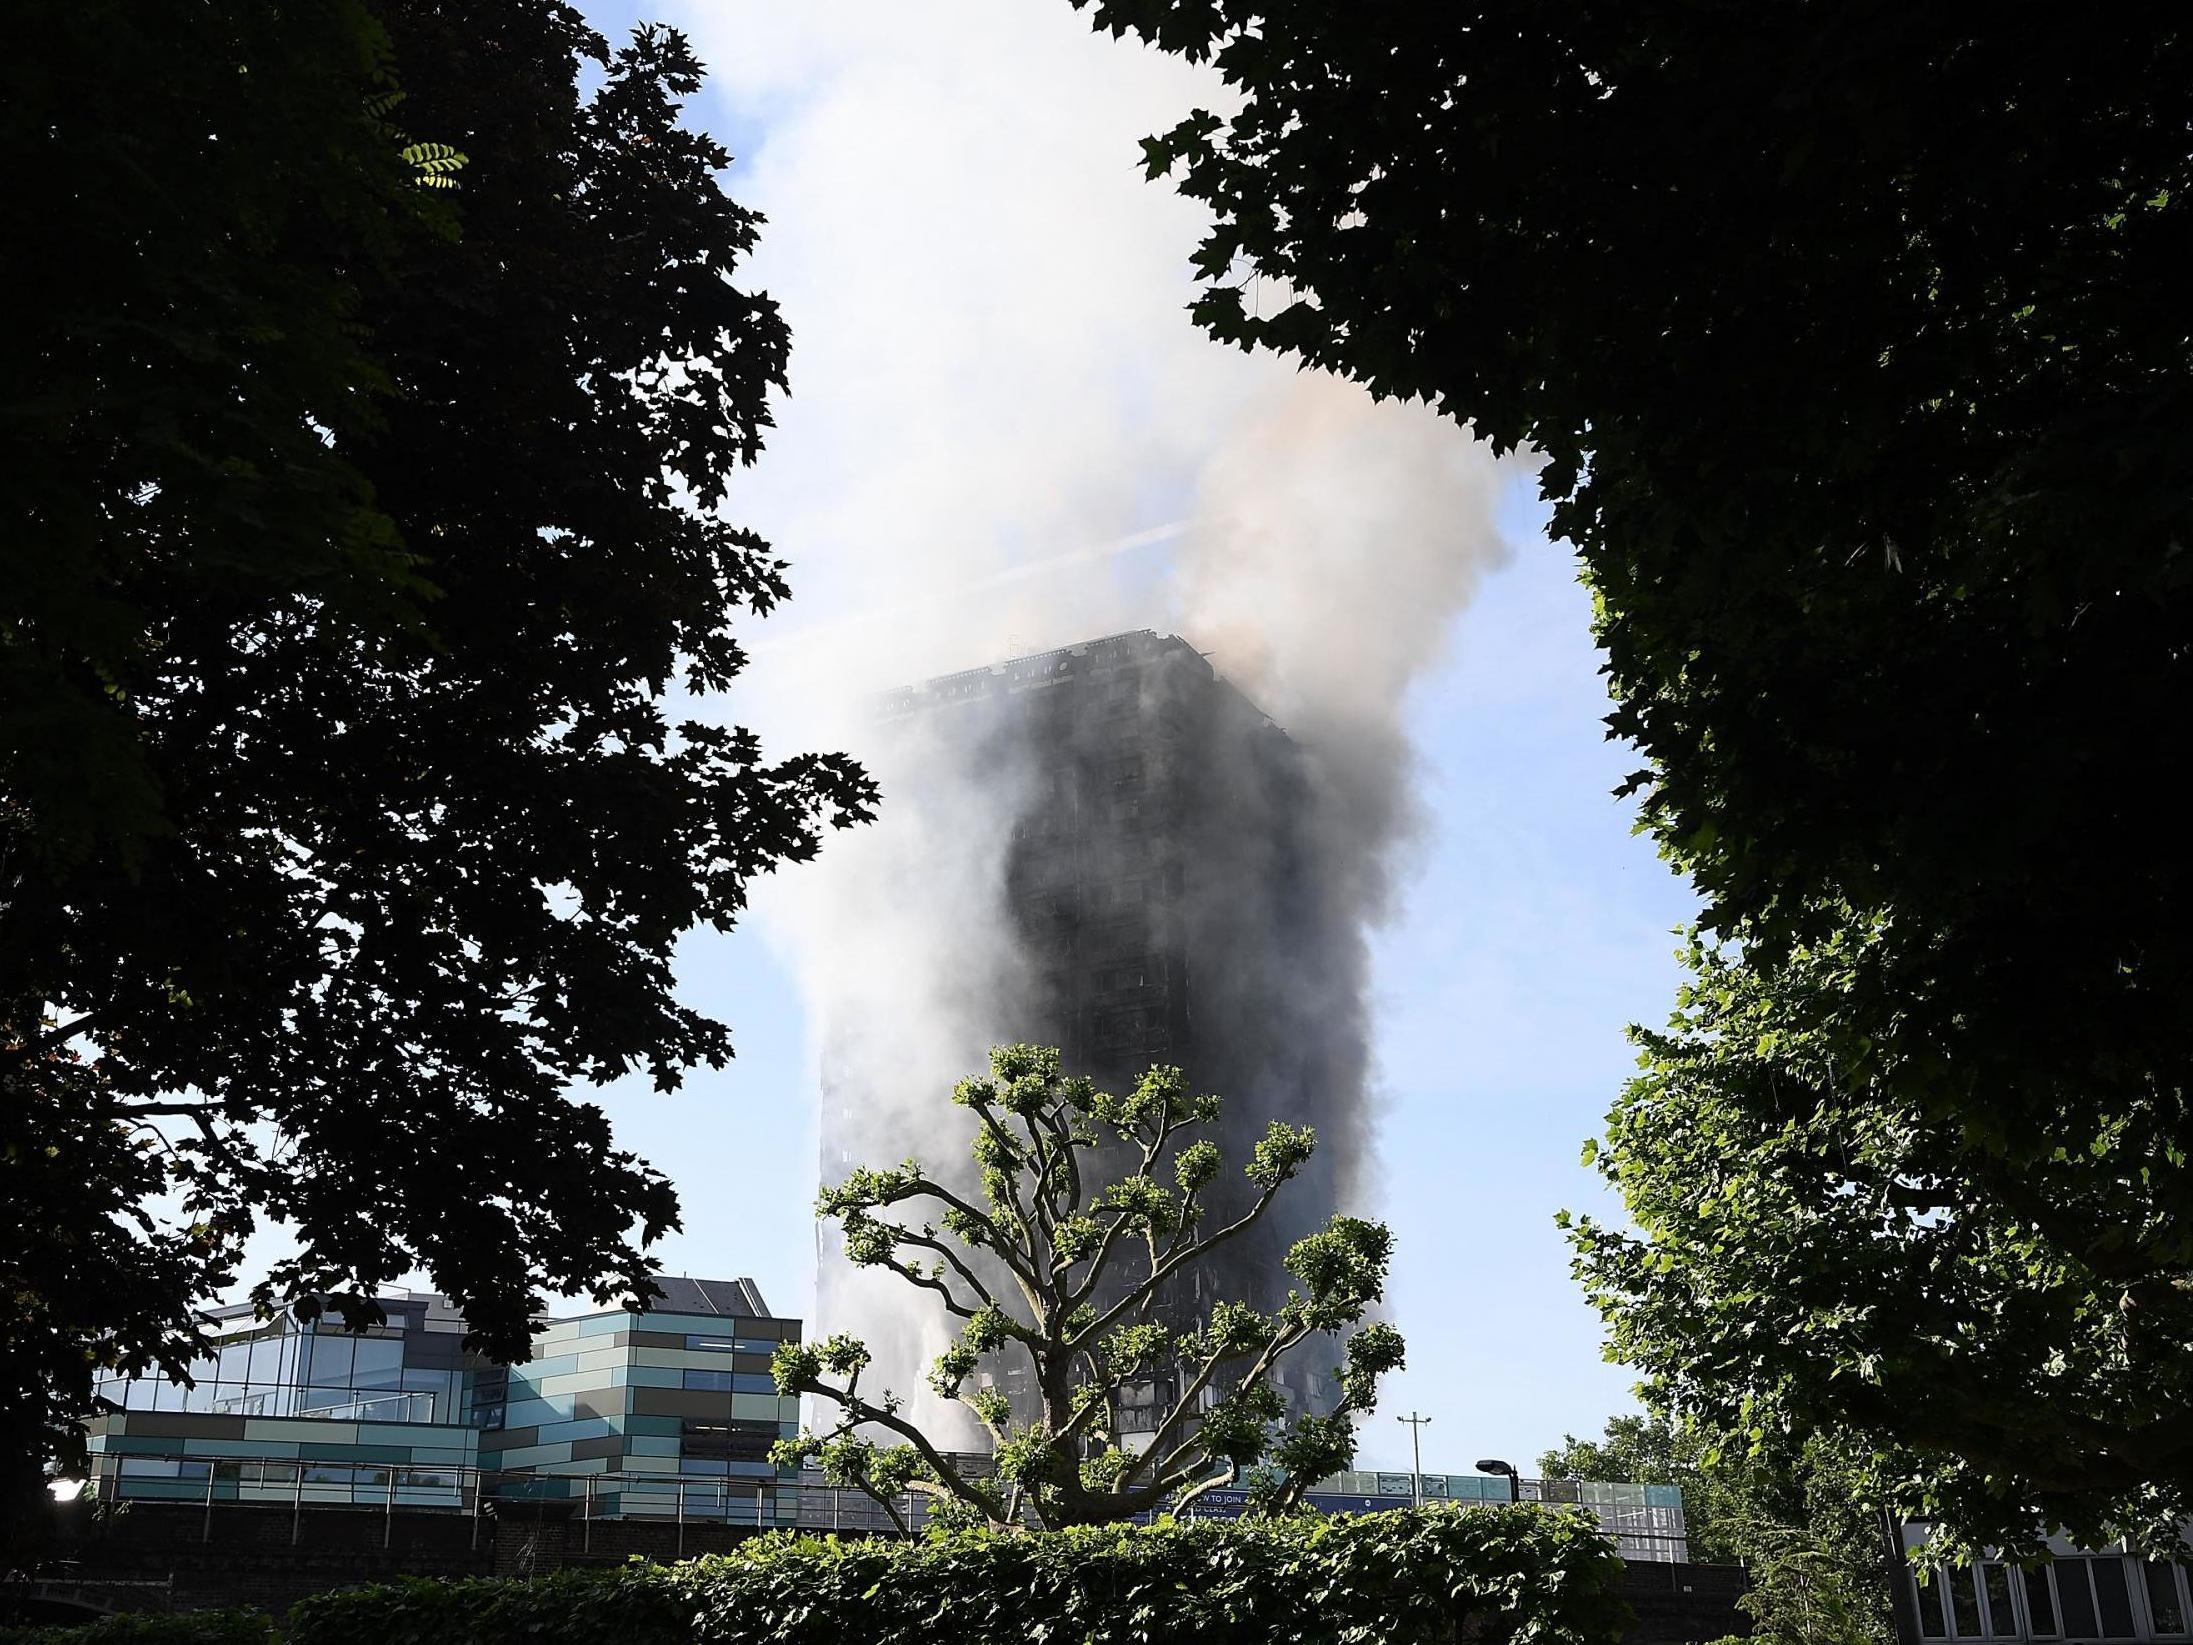 Smoke rises from the building after a huge fire engulfed the 24 storey residential Grenfell Tower block in Latimer Road, West London in the early hours of June 14, 2017 in London, England